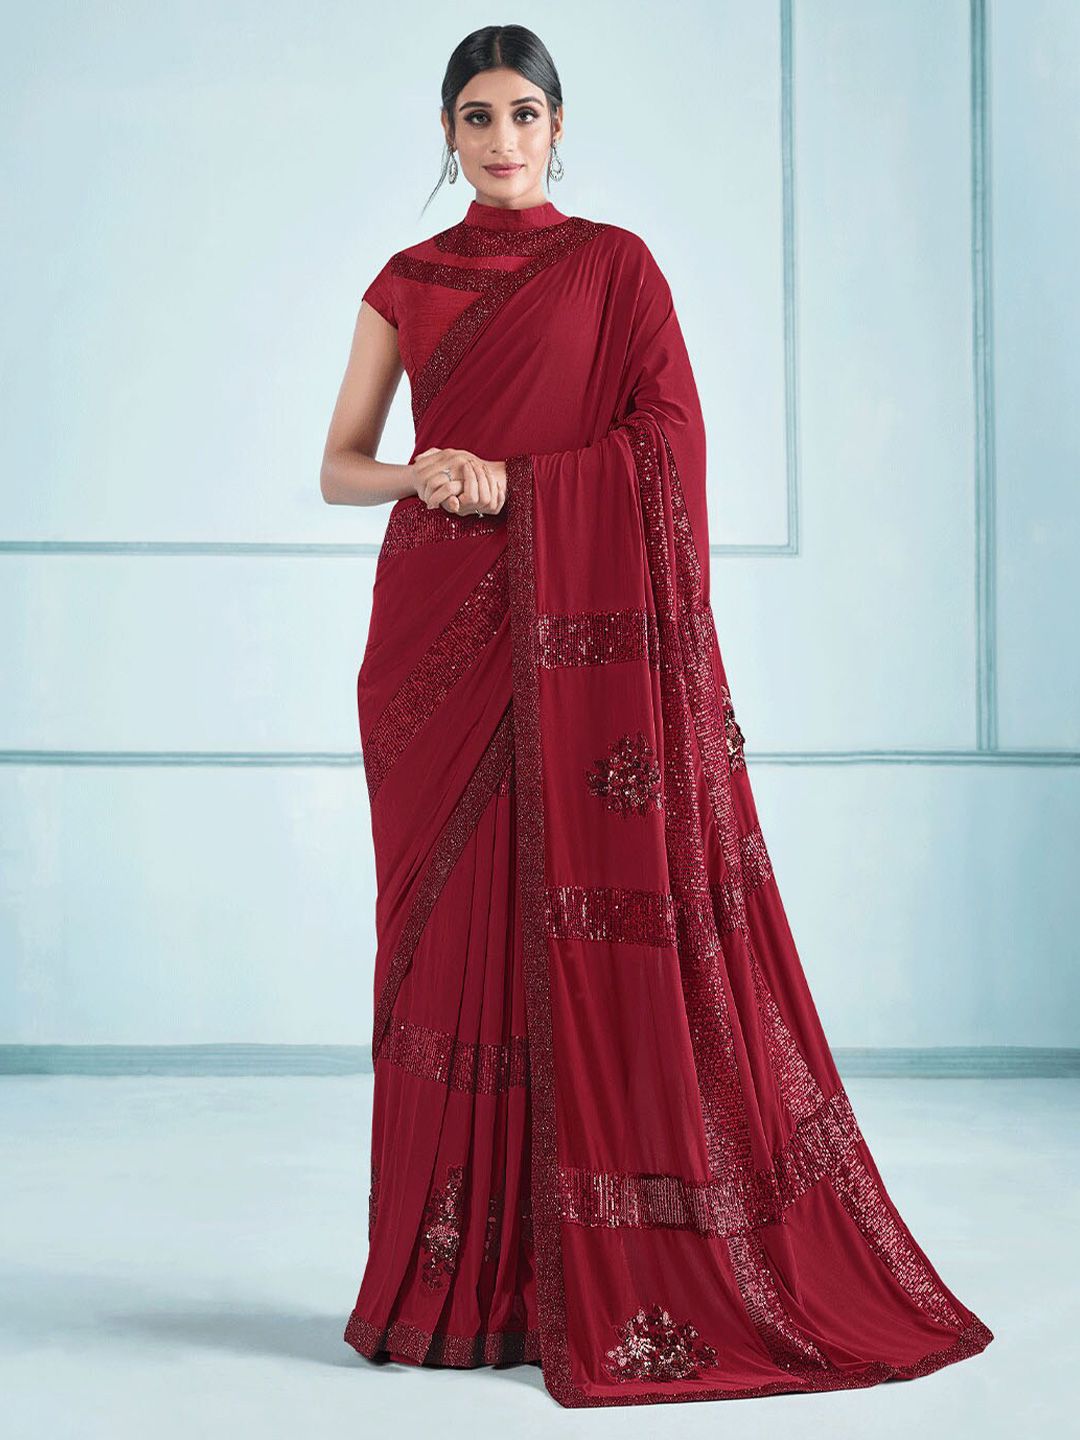 ODETTE Red Beads and Stones Saree Price in India